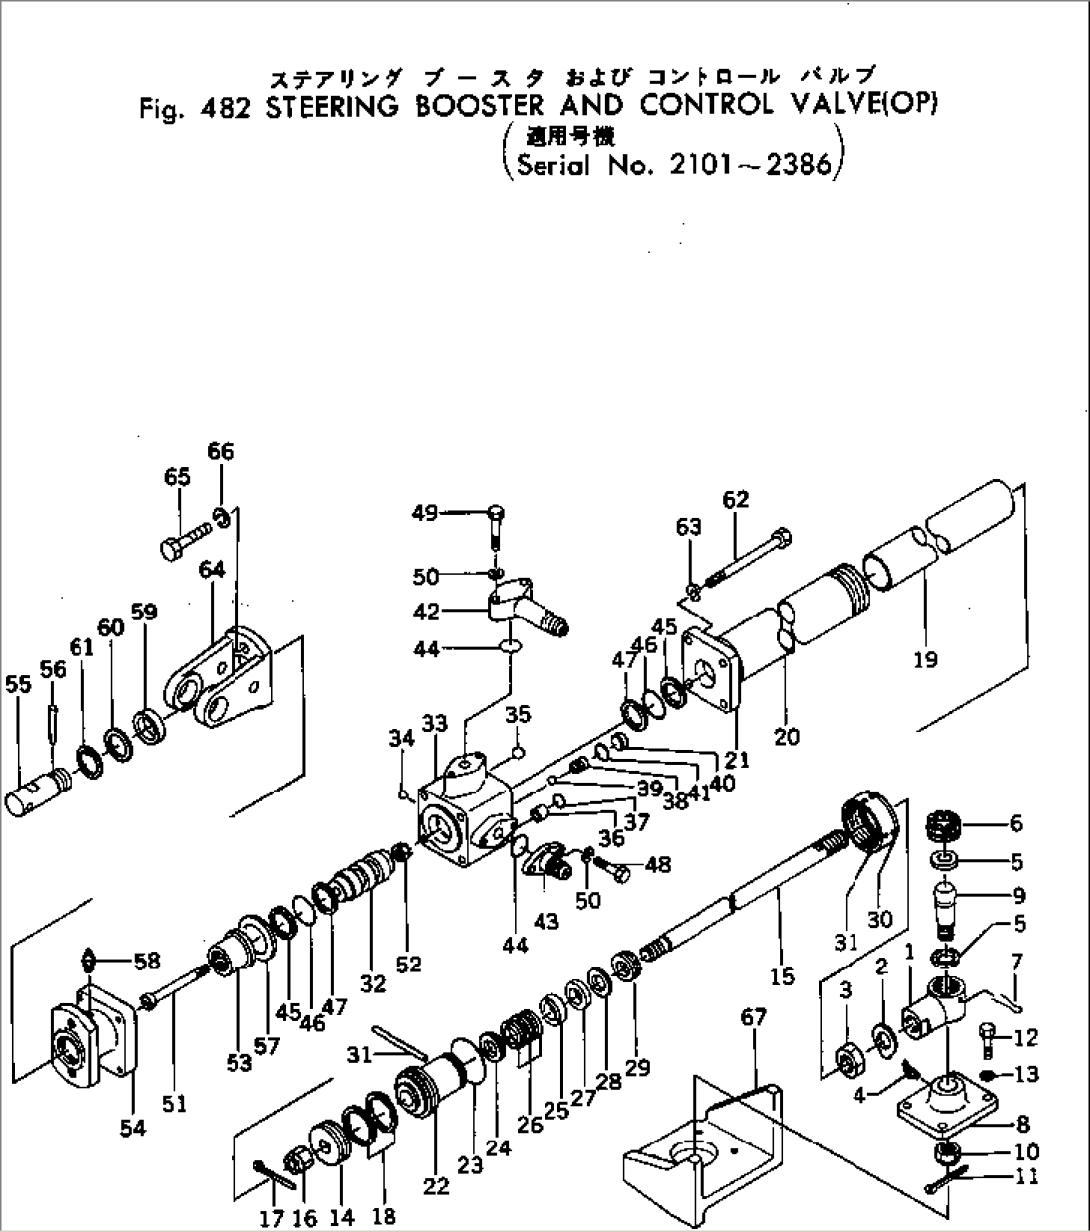 STEERING BOOSTER AND CONTROL VALVE (OP)(#2101-2386)